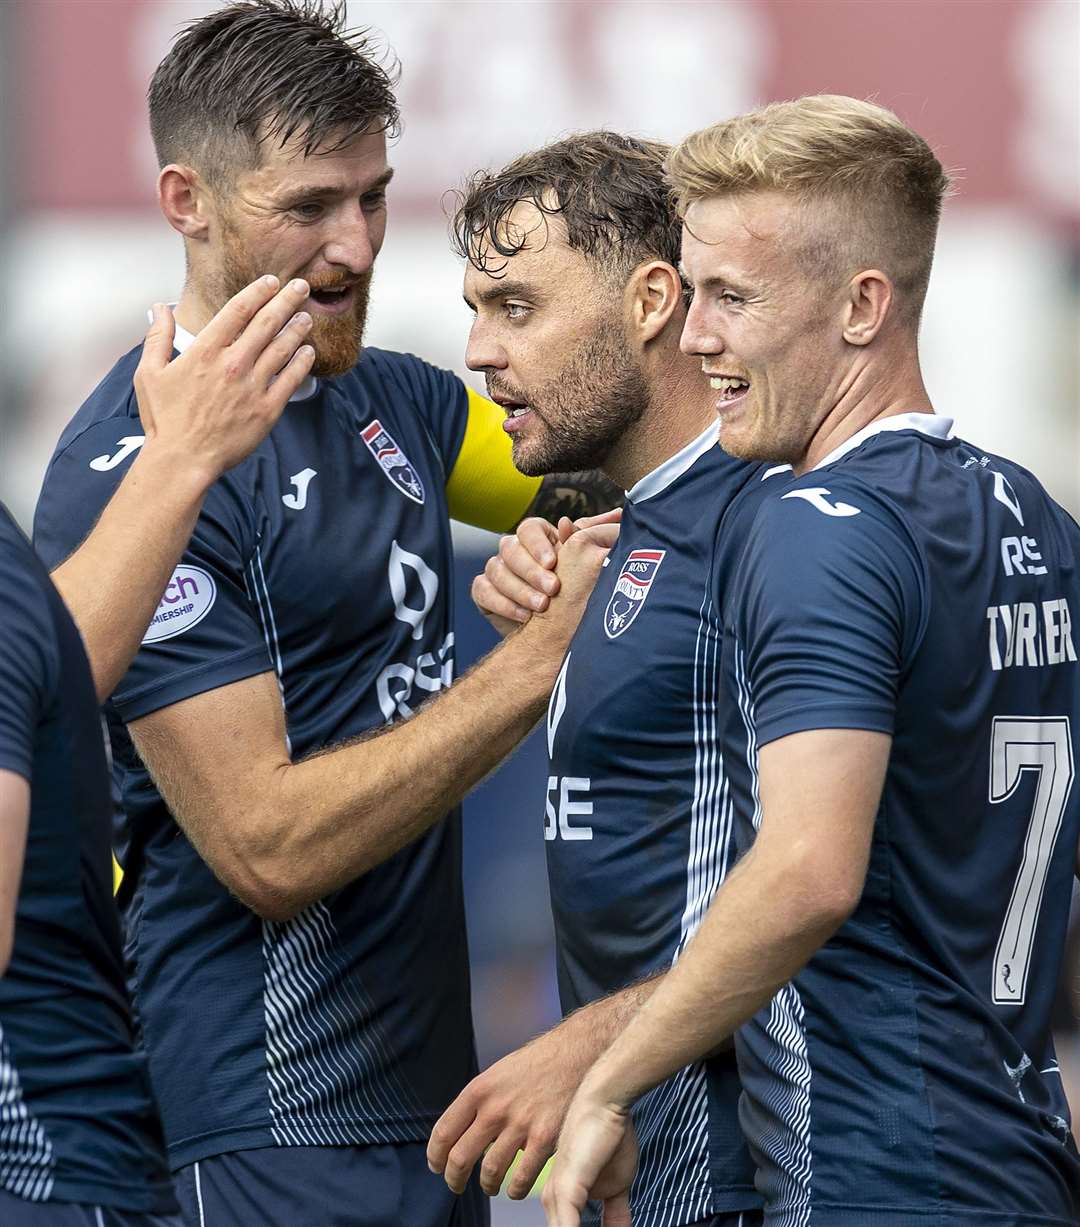 Ross County's Connor Randall (centre) celebrates Saturday's goal against St Johnstone with Jack Baldwin (left) and Kyle Turner.